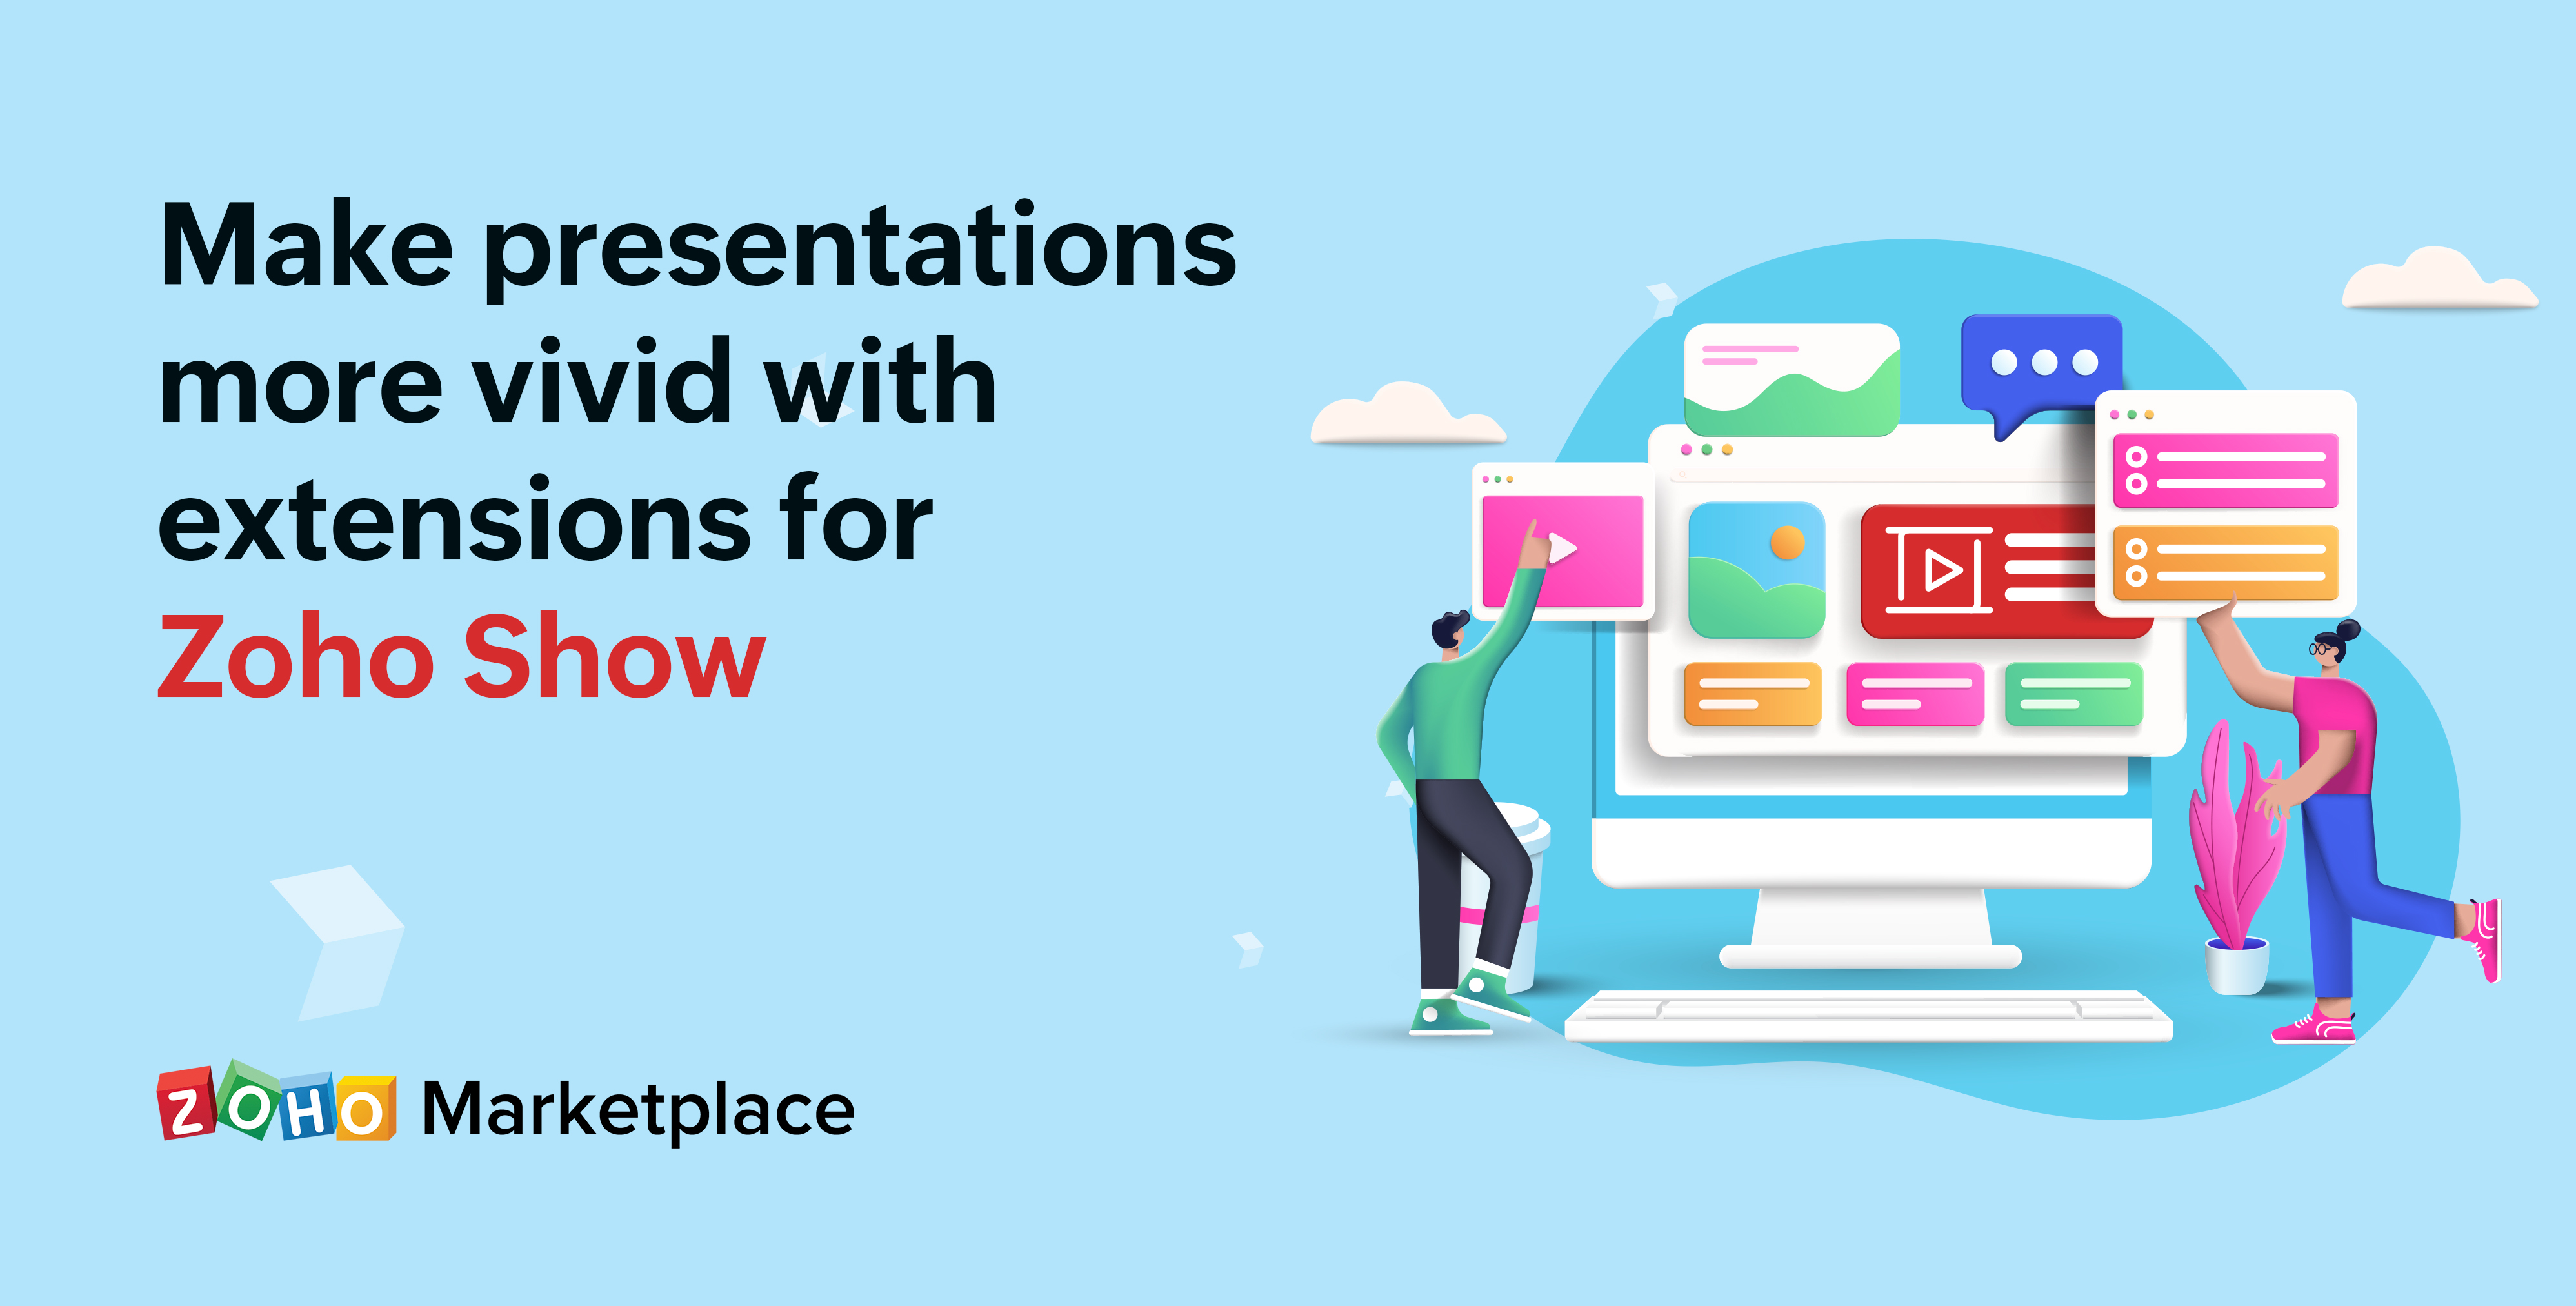 Make presentations more vivid with extensions for Zoho Show